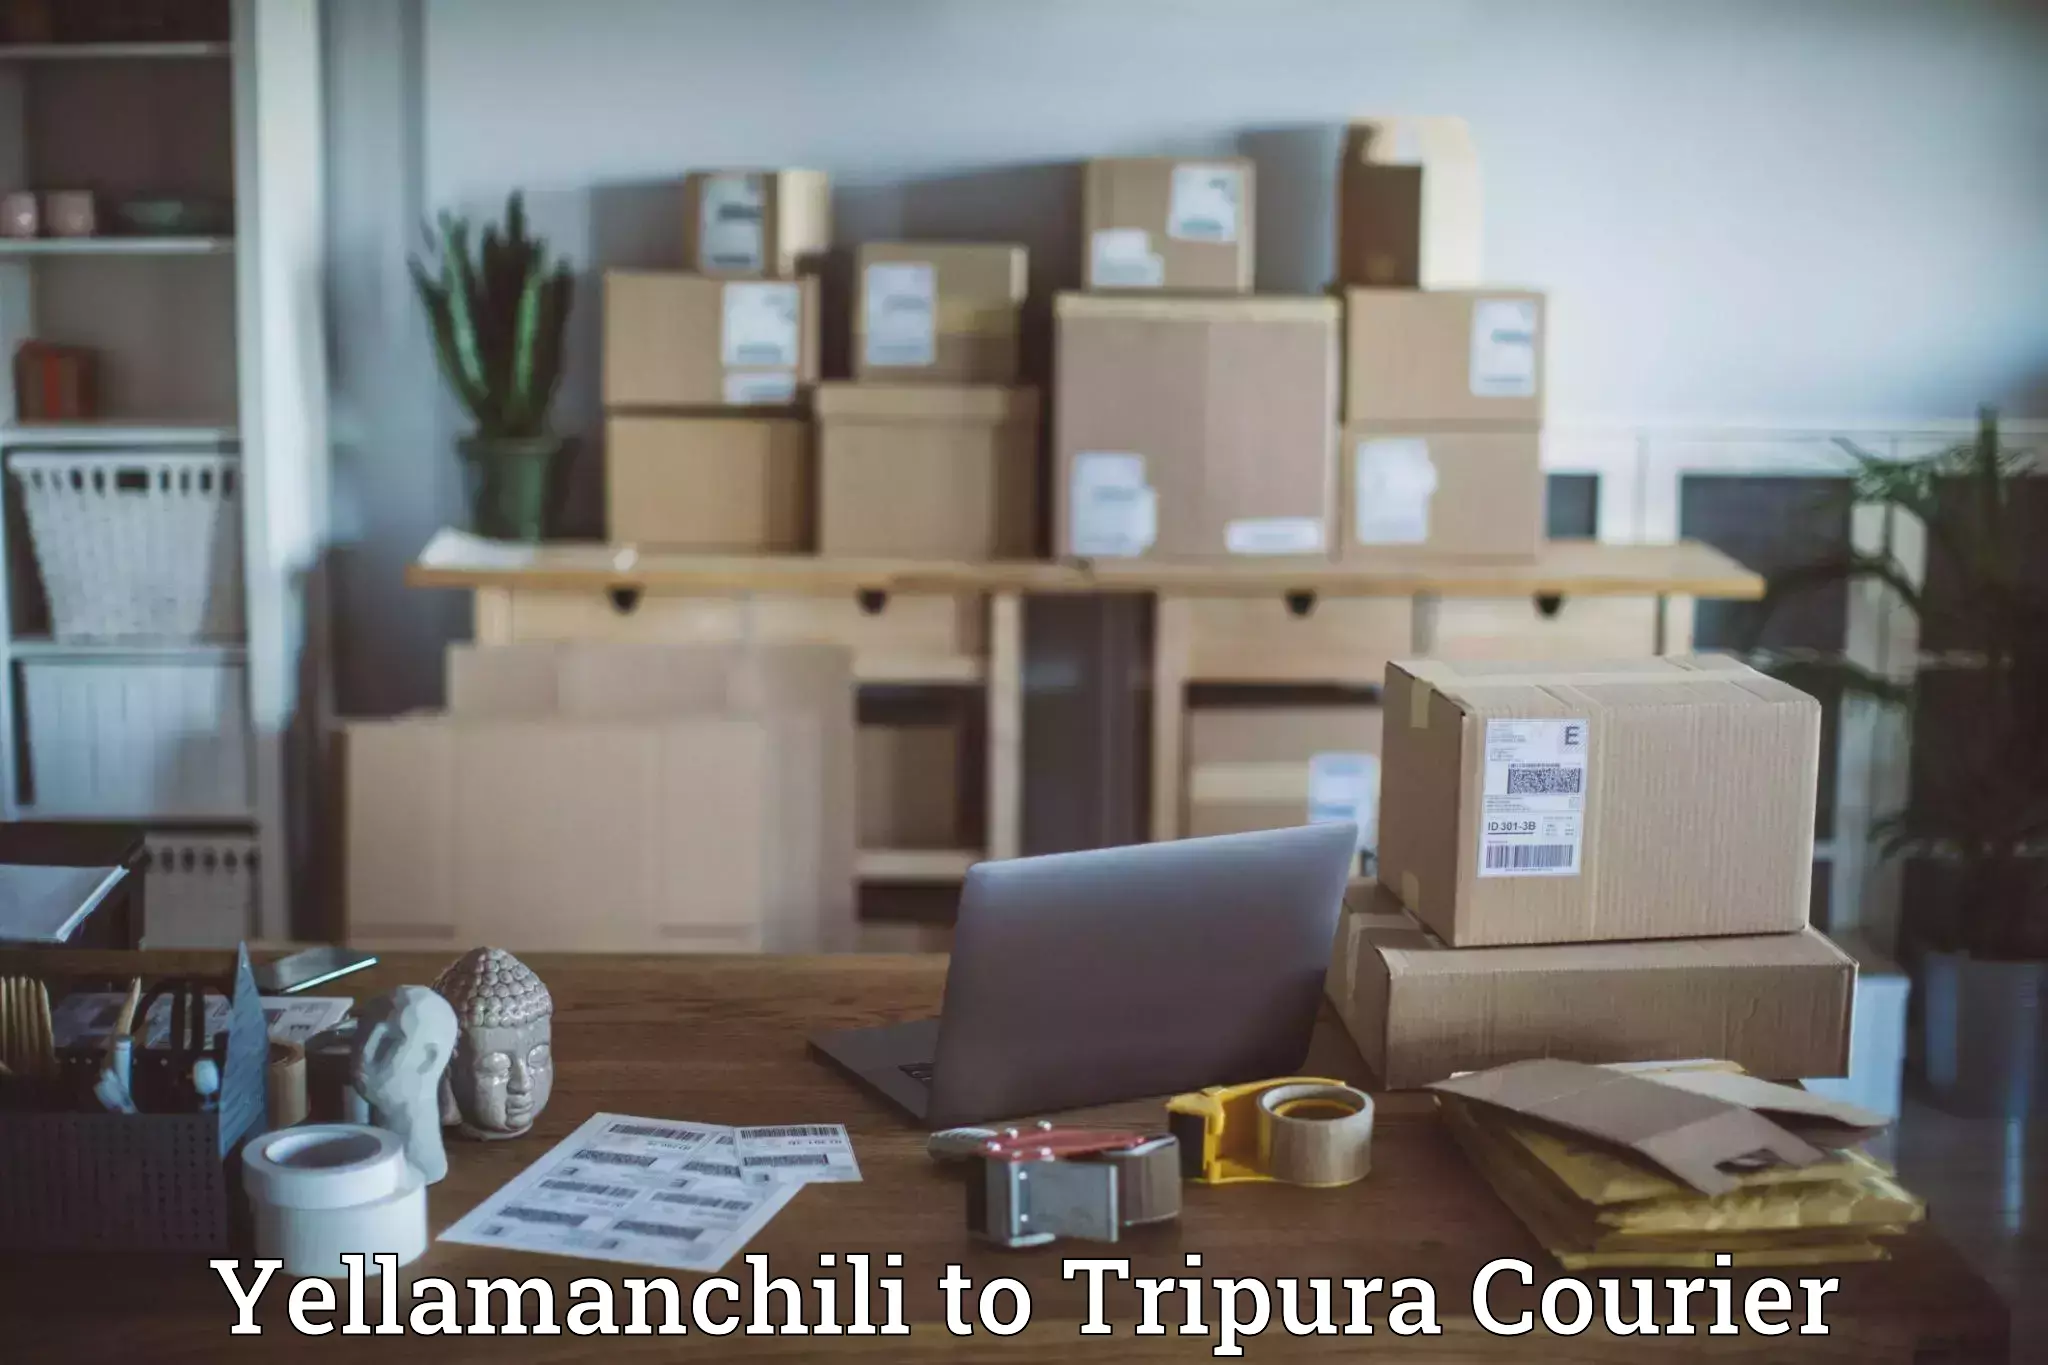 Package delivery network Yellamanchili to Udaipur Tripura